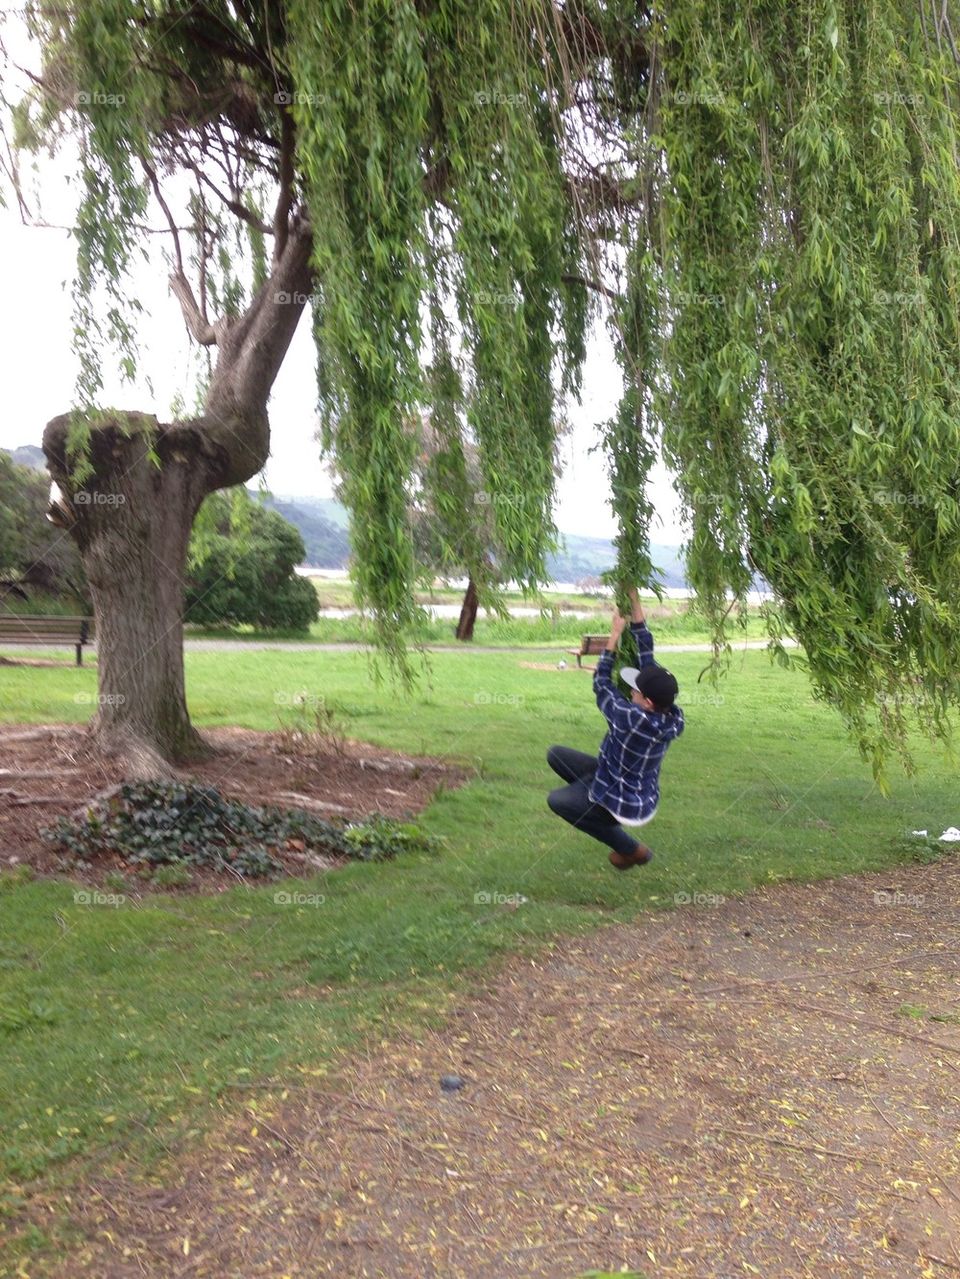 Chase swinging on a Weeping Willow